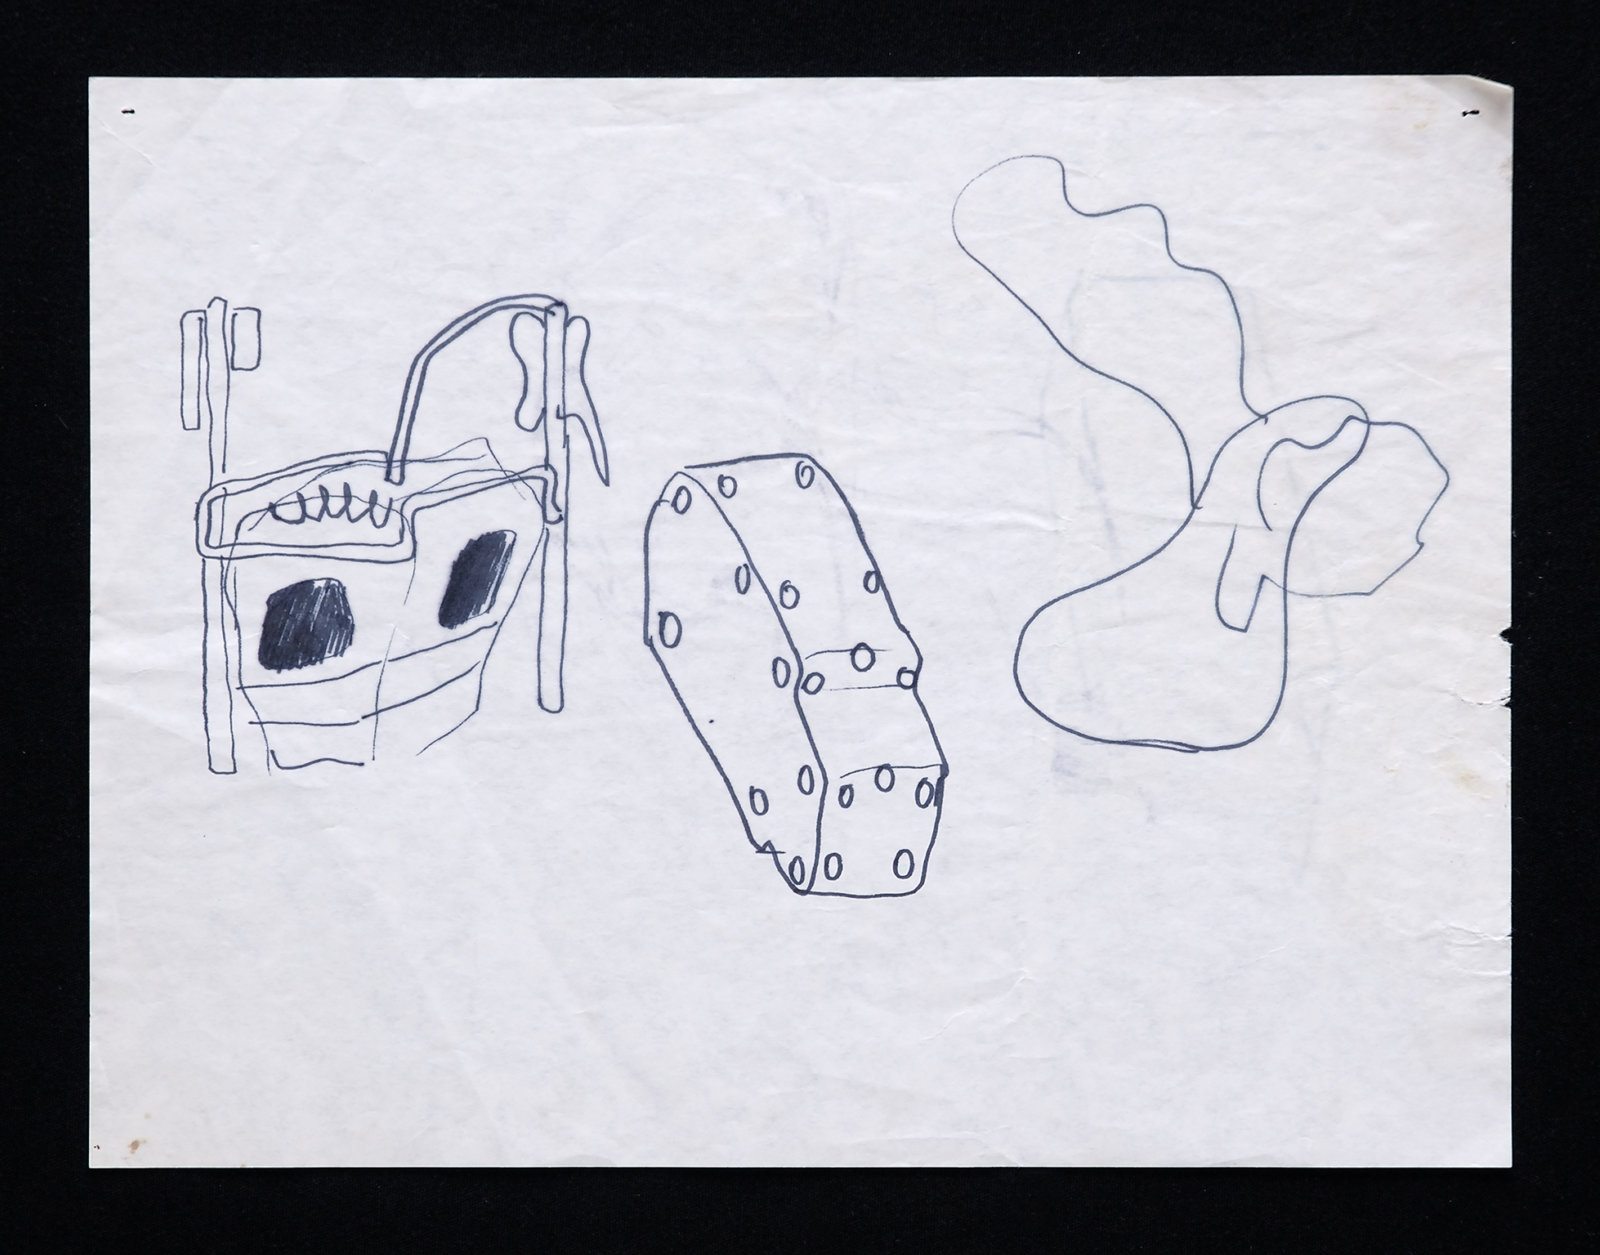 Jerry Pethick, Santini, 1968, 2 drawings, black pen on paper, 9 x 11 in. (28 x 22 cm)